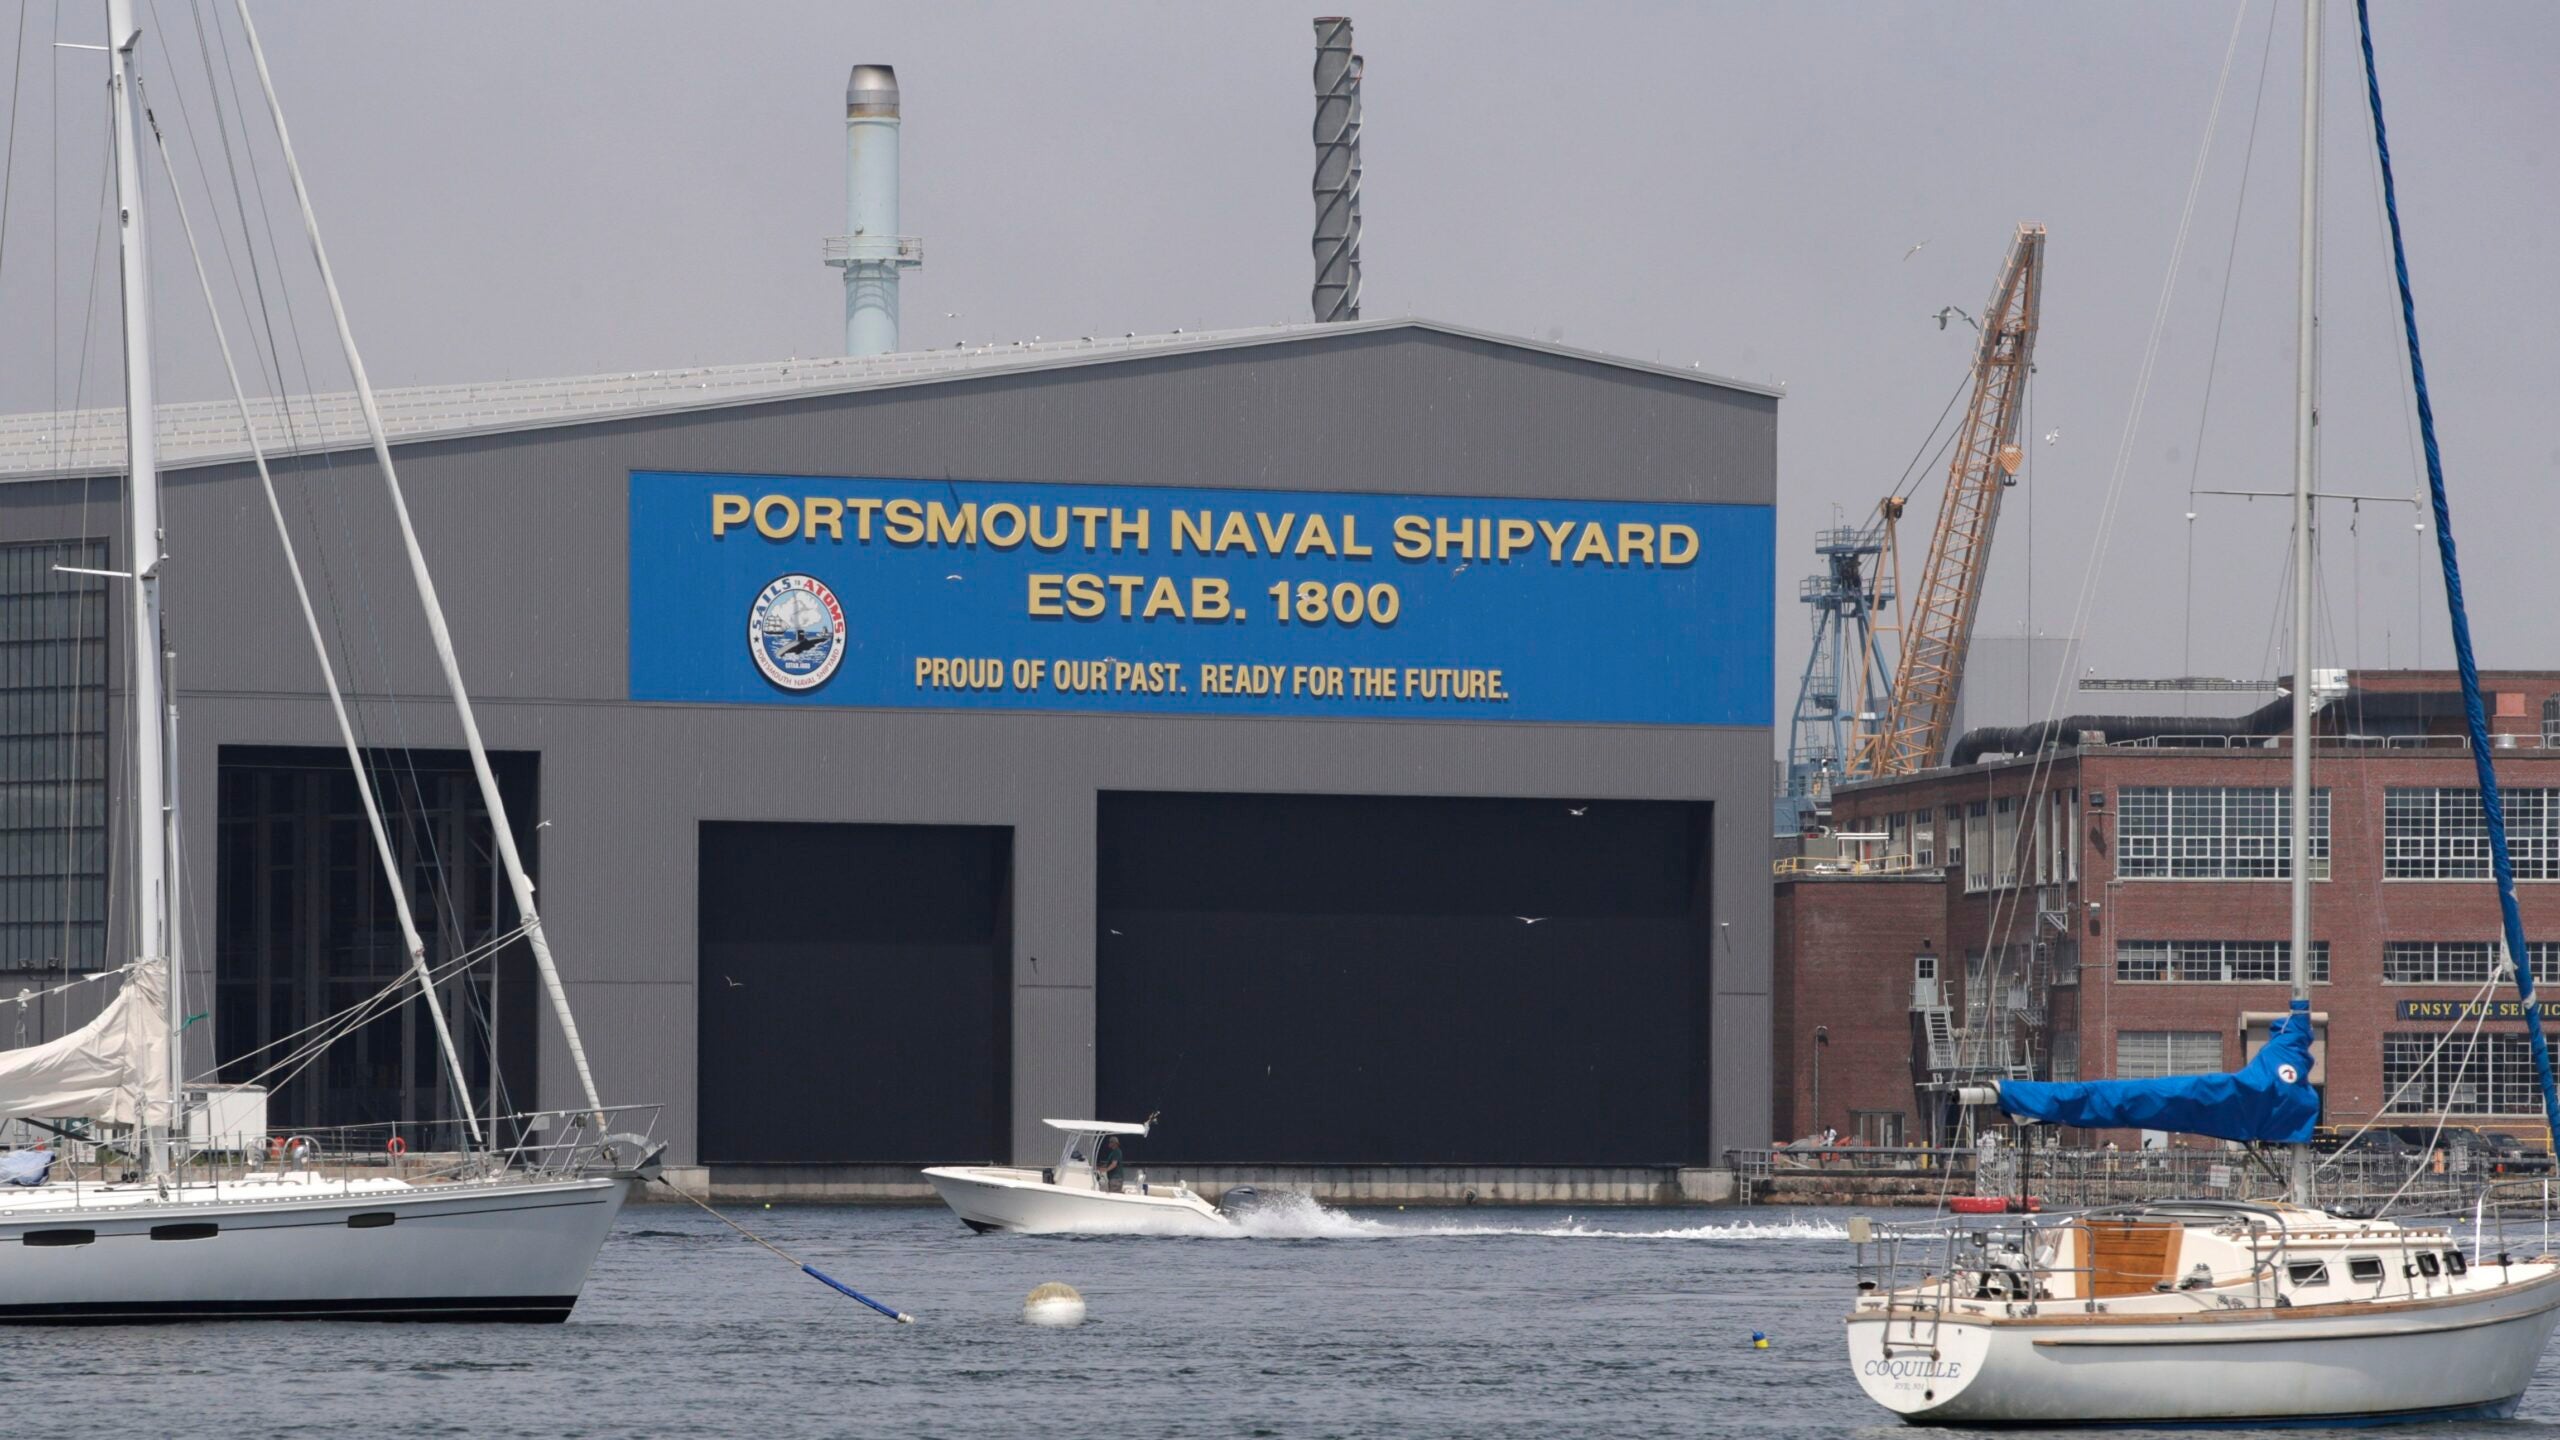 A small pleasure craft passes through the Portsmouth Naval Shipyard in 2020.